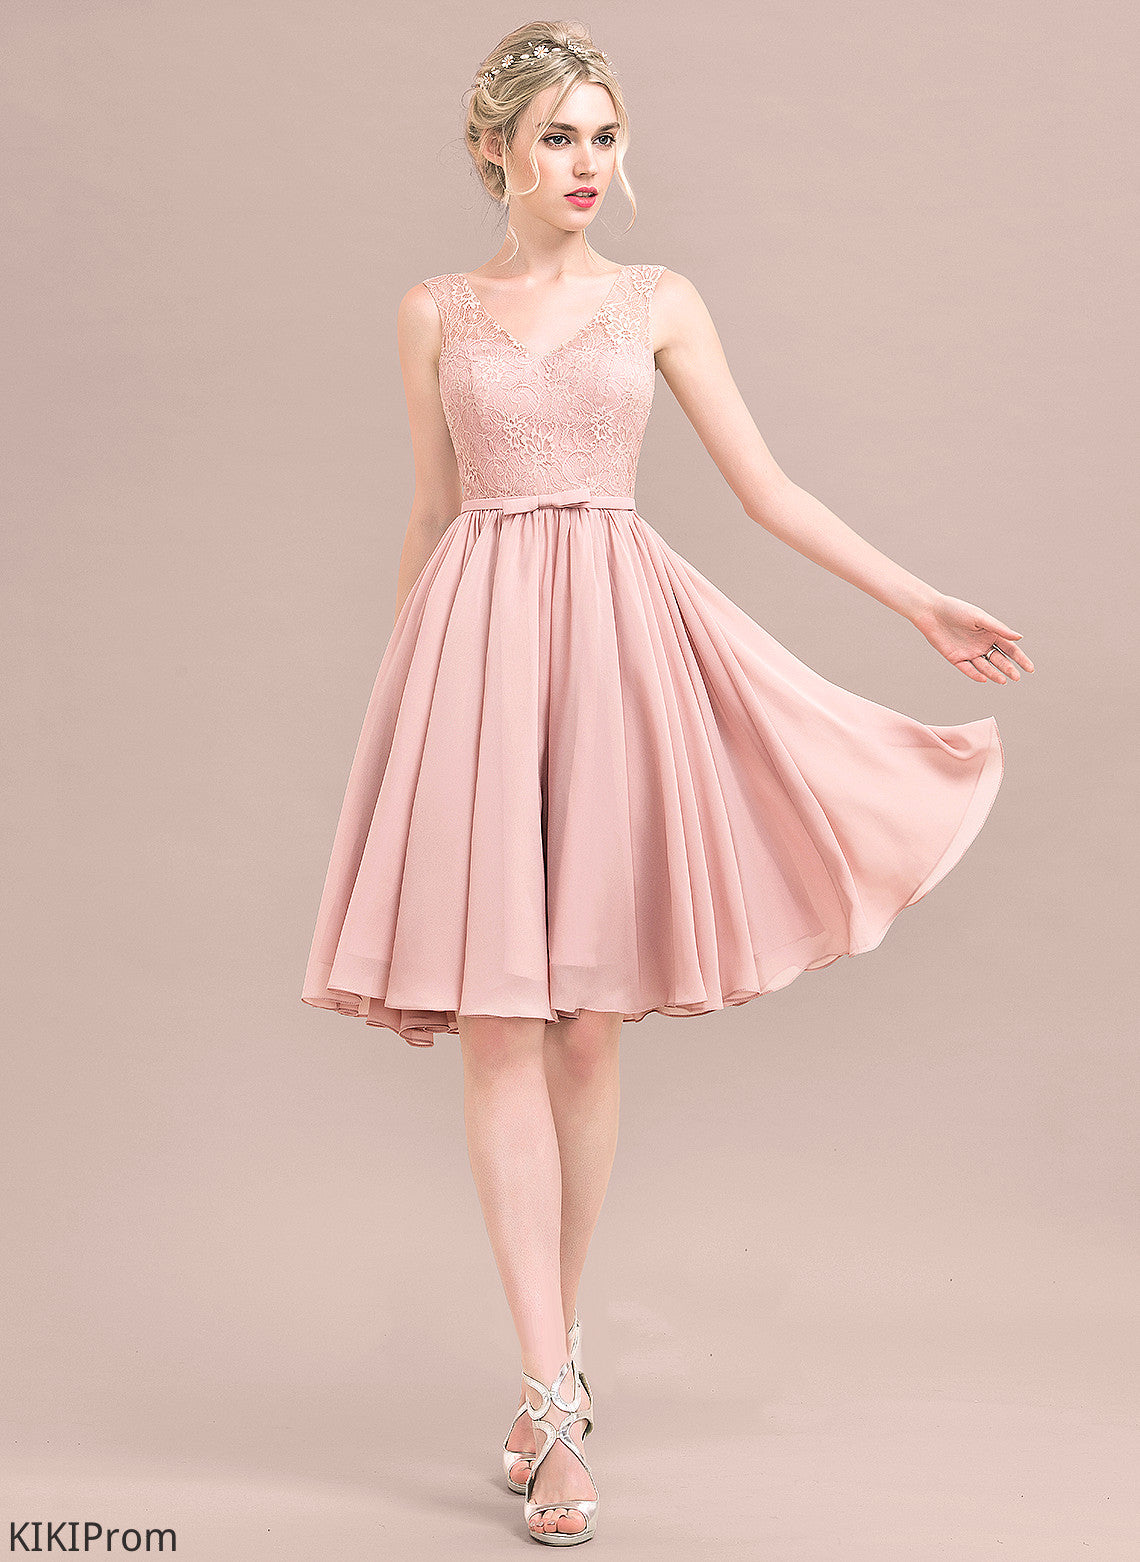 Chiffon Lace Bow(s) Mariam A-Line With Dress V-neck Knee-Length Lace Homecoming Homecoming Dresses